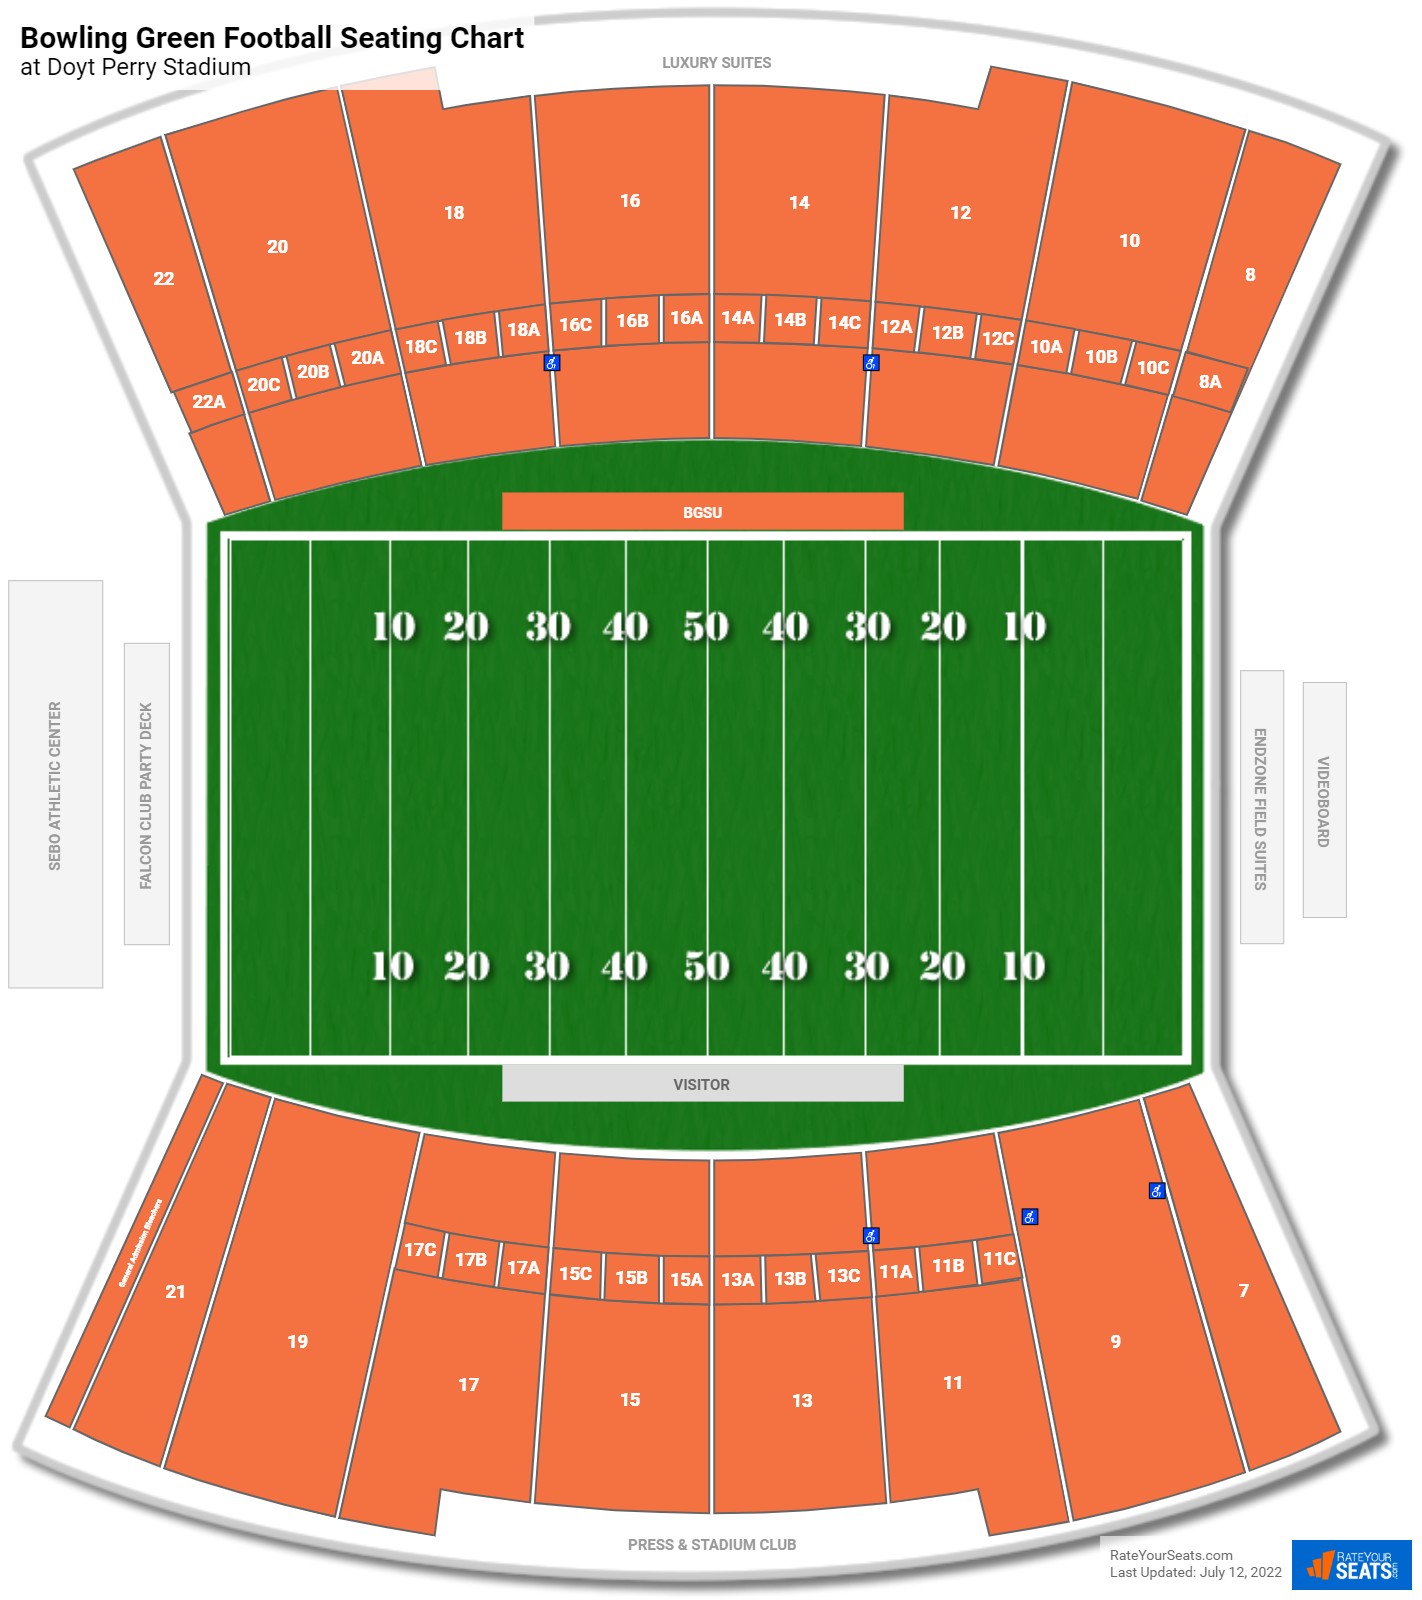 Bowling Green Falcons Seating Chart at Doyt Perry Stadium